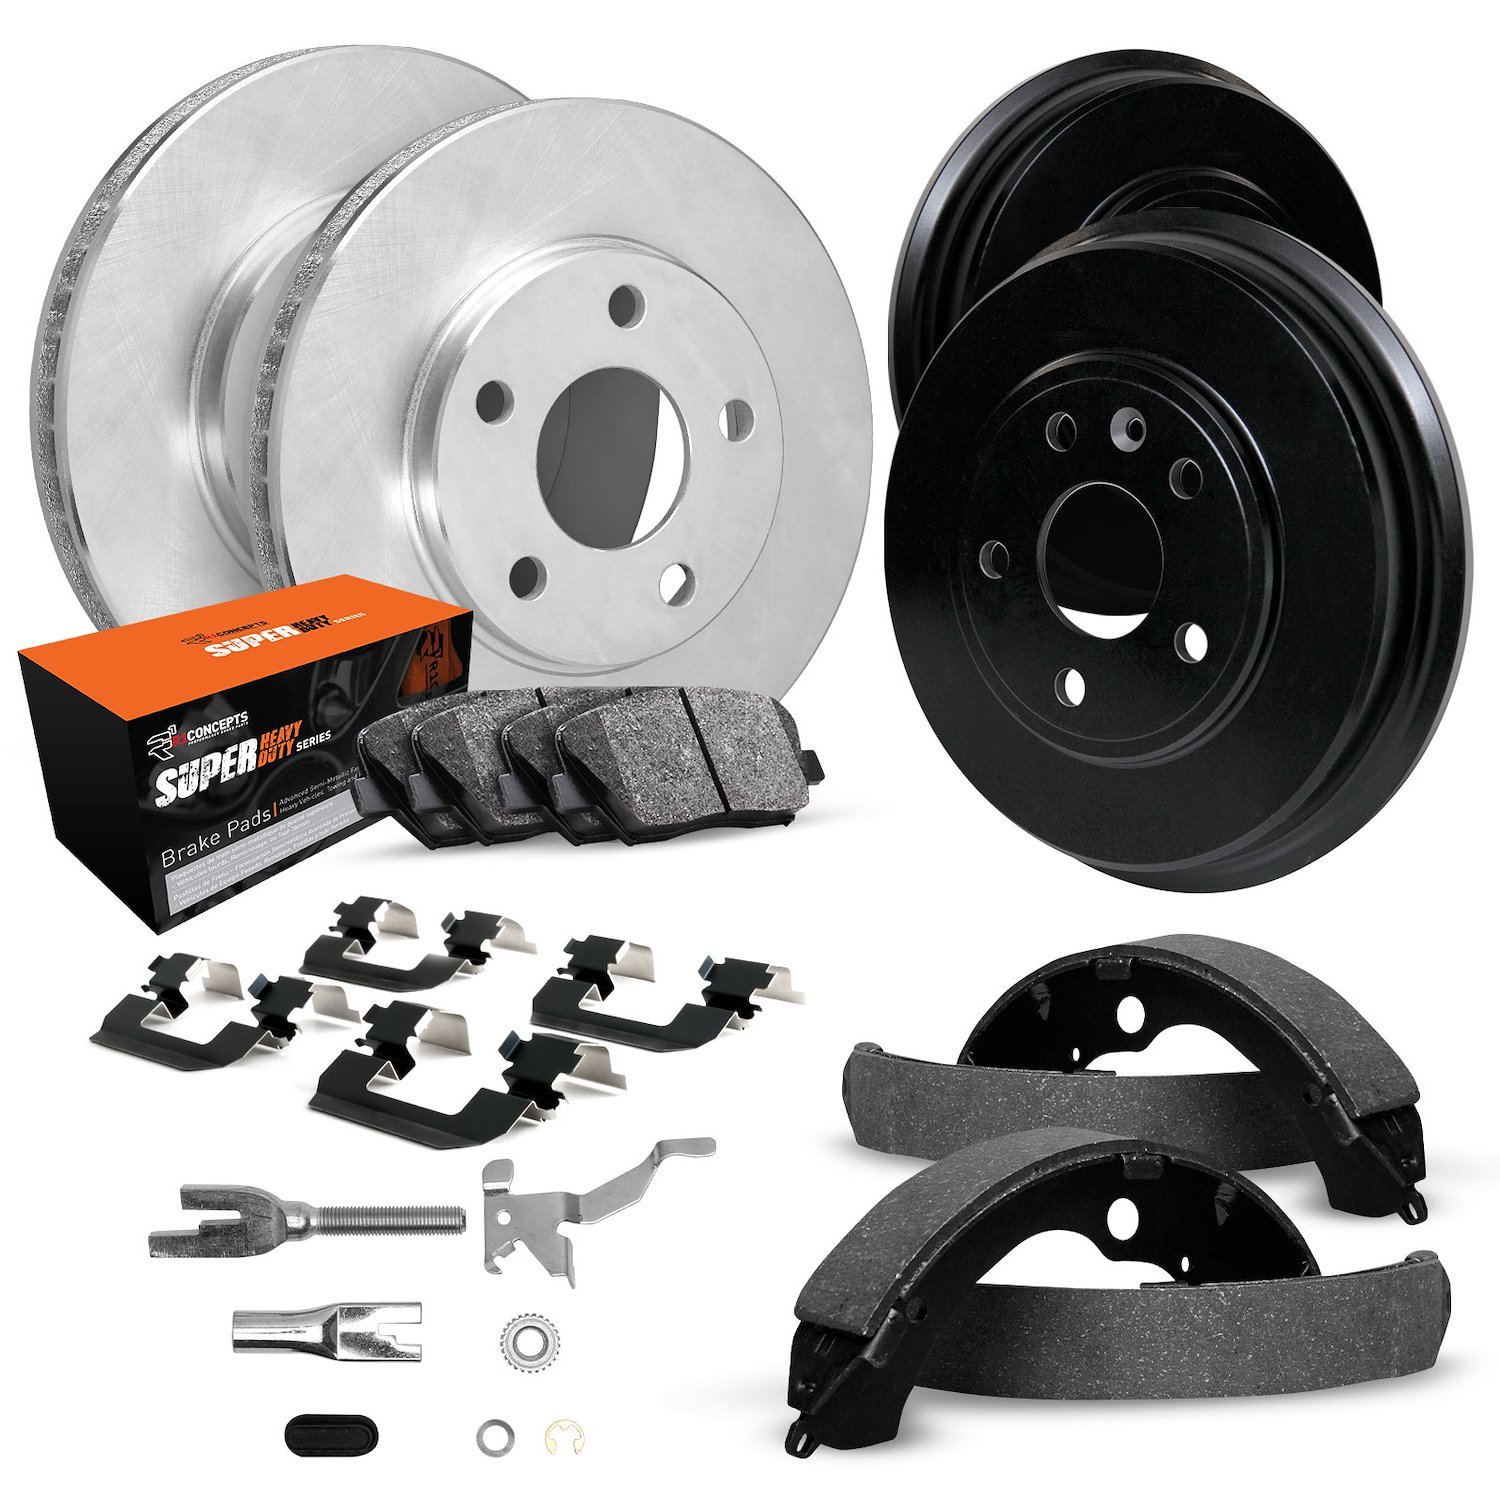 E-Line Blank Brake Rotor & Drum Set w/Super-Duty Pads, Shoes, Hardware, & Adjusters, 1978-1990 GM, Position: Front & Rear